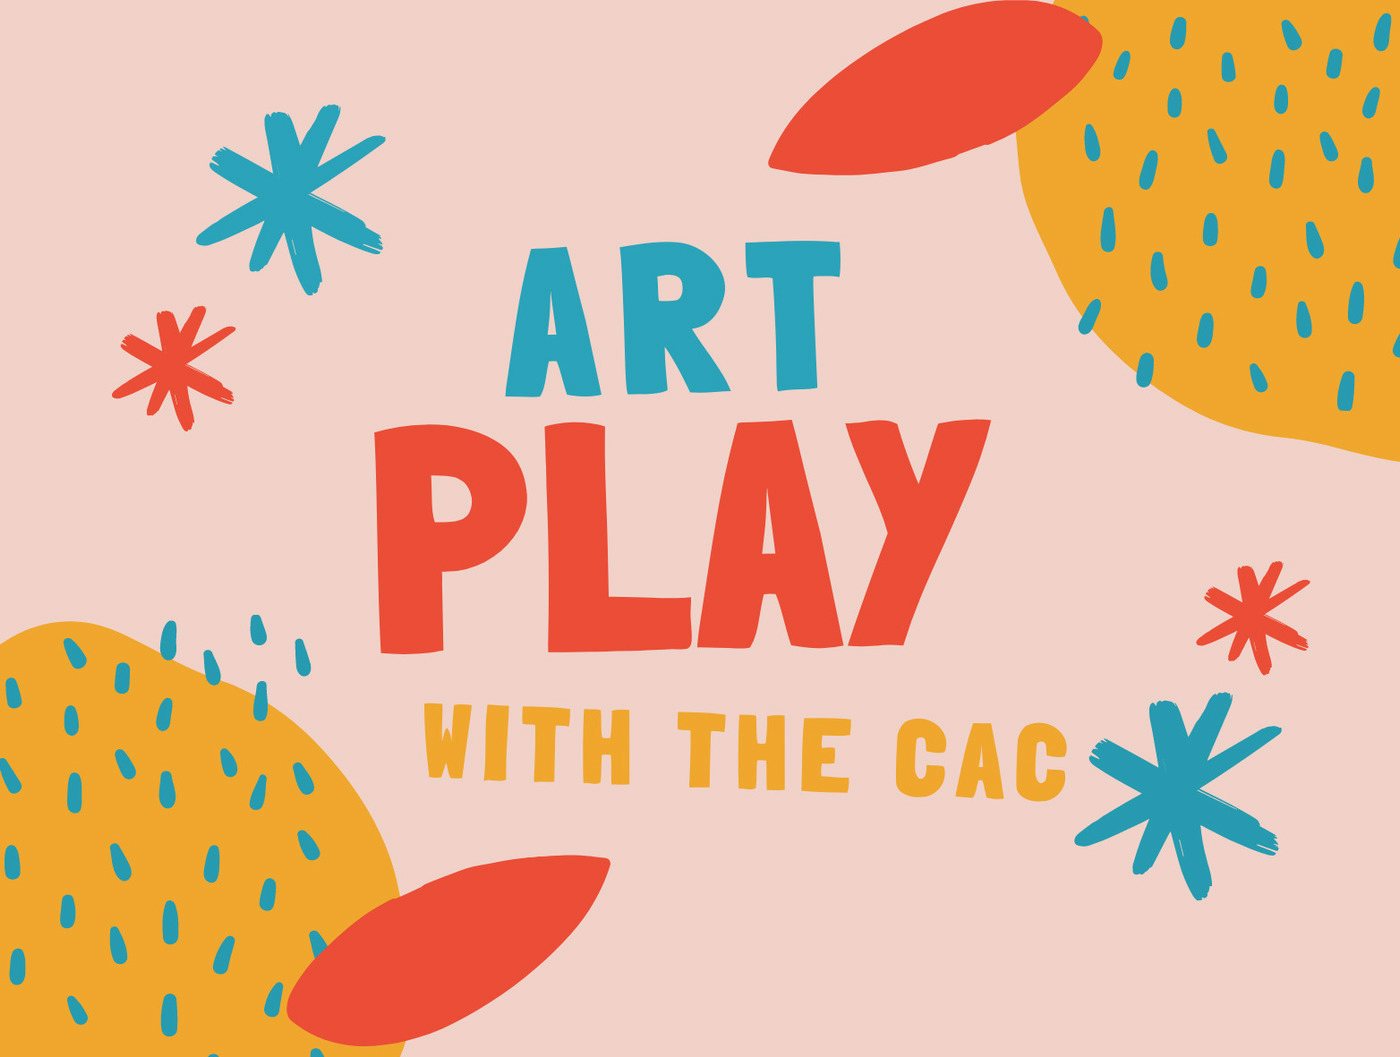 Thursday Art Play: CANCELED DUE TO WEATHER